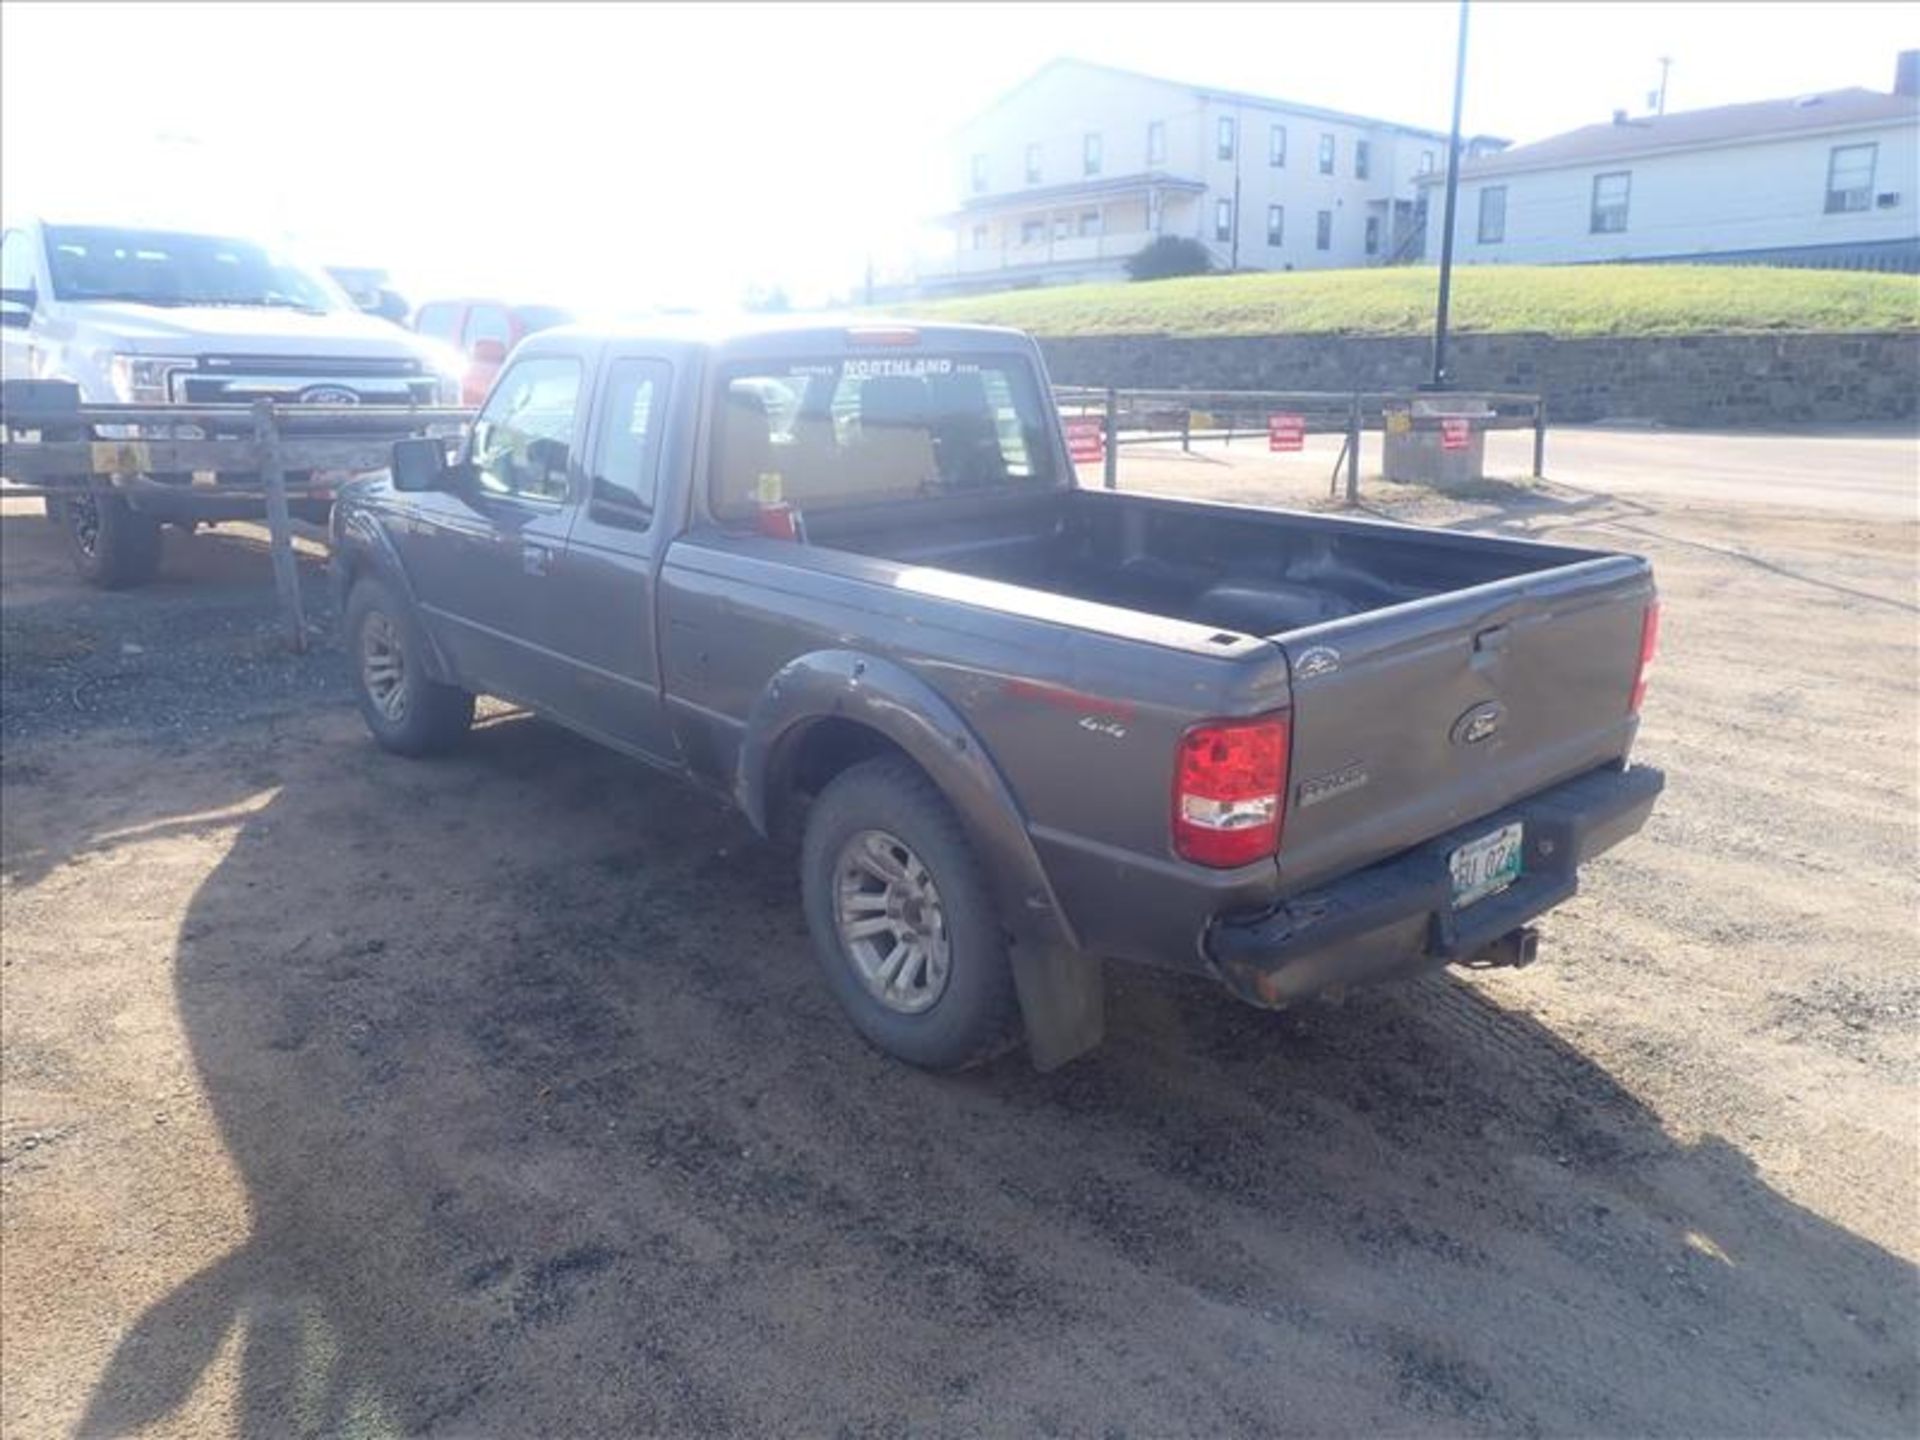 2011 Ford Ranger Sport pick-up truck, VIN 1FTLR4FEXBPA40478, approx. 105000 km, 4x4, 4L eng. (Tag - Image 2 of 8